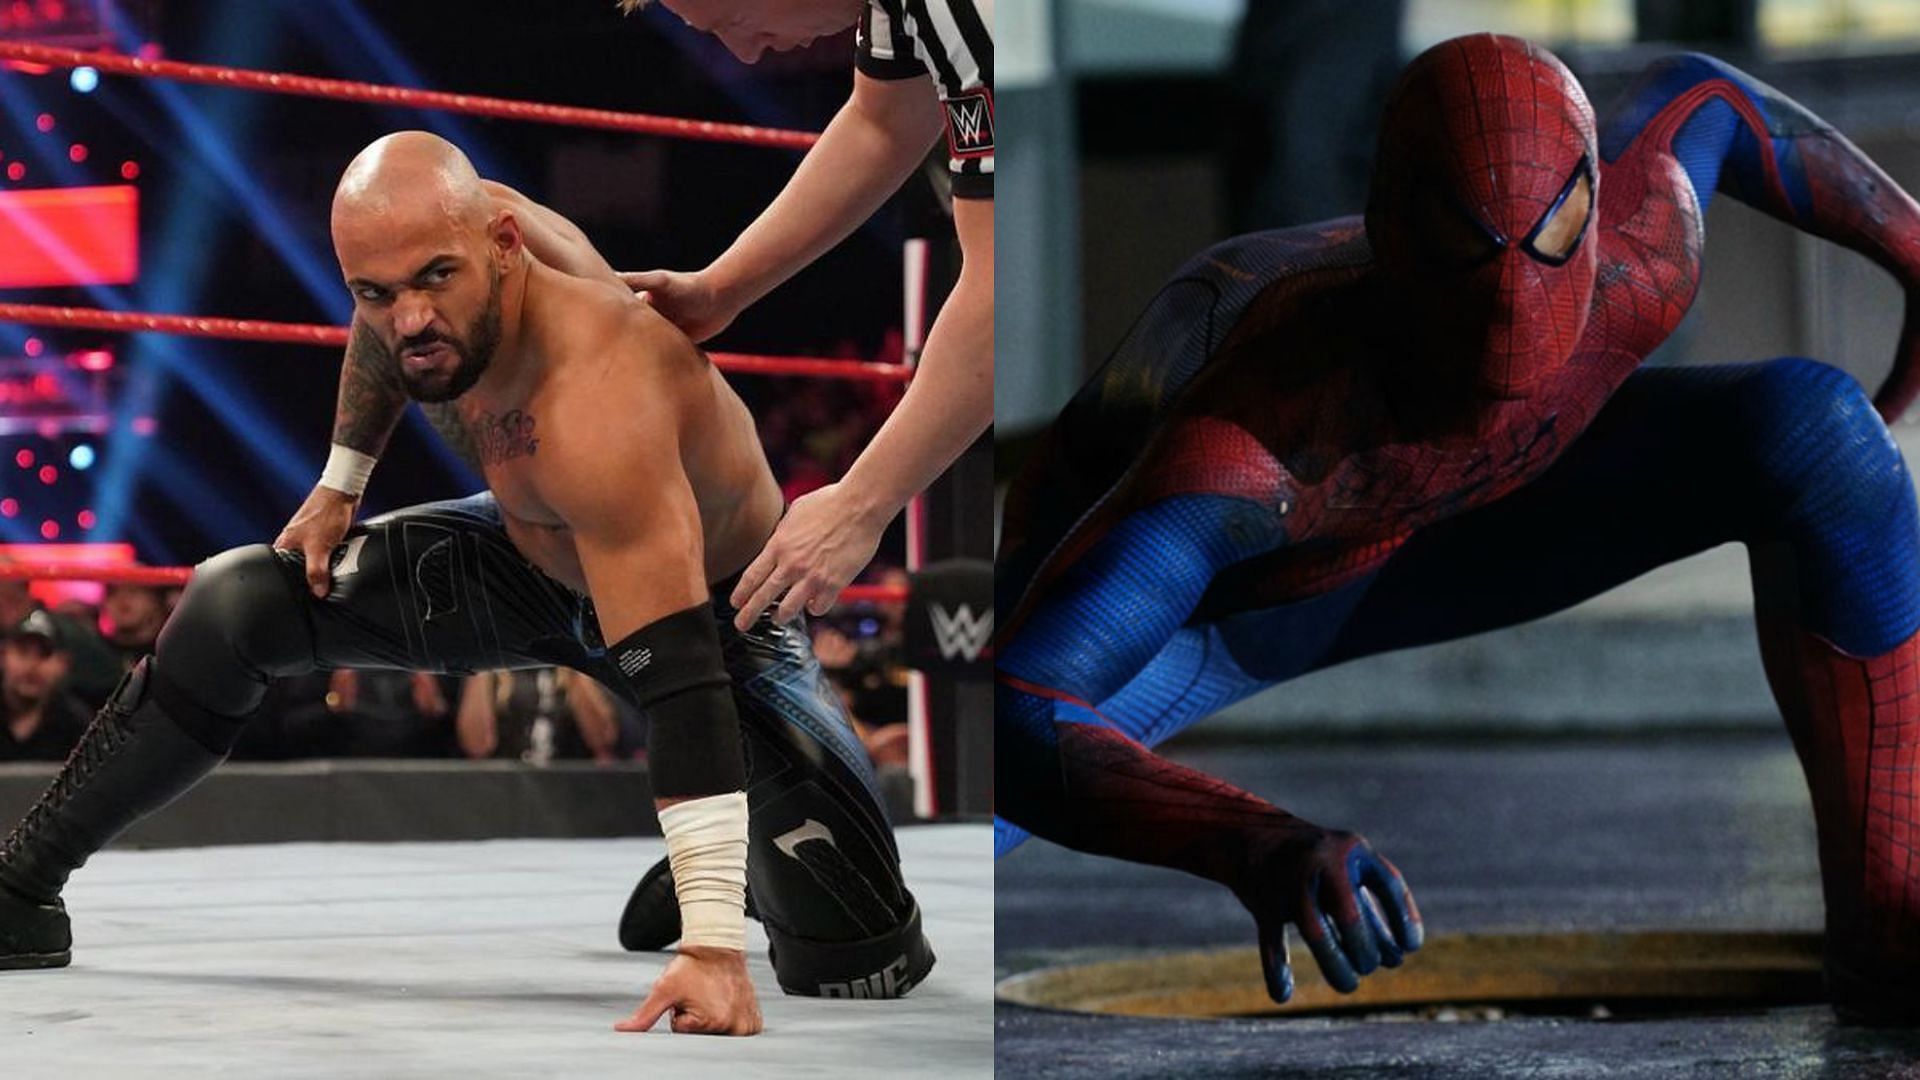 WWE Superstar Ricochet was compared to Spiderman